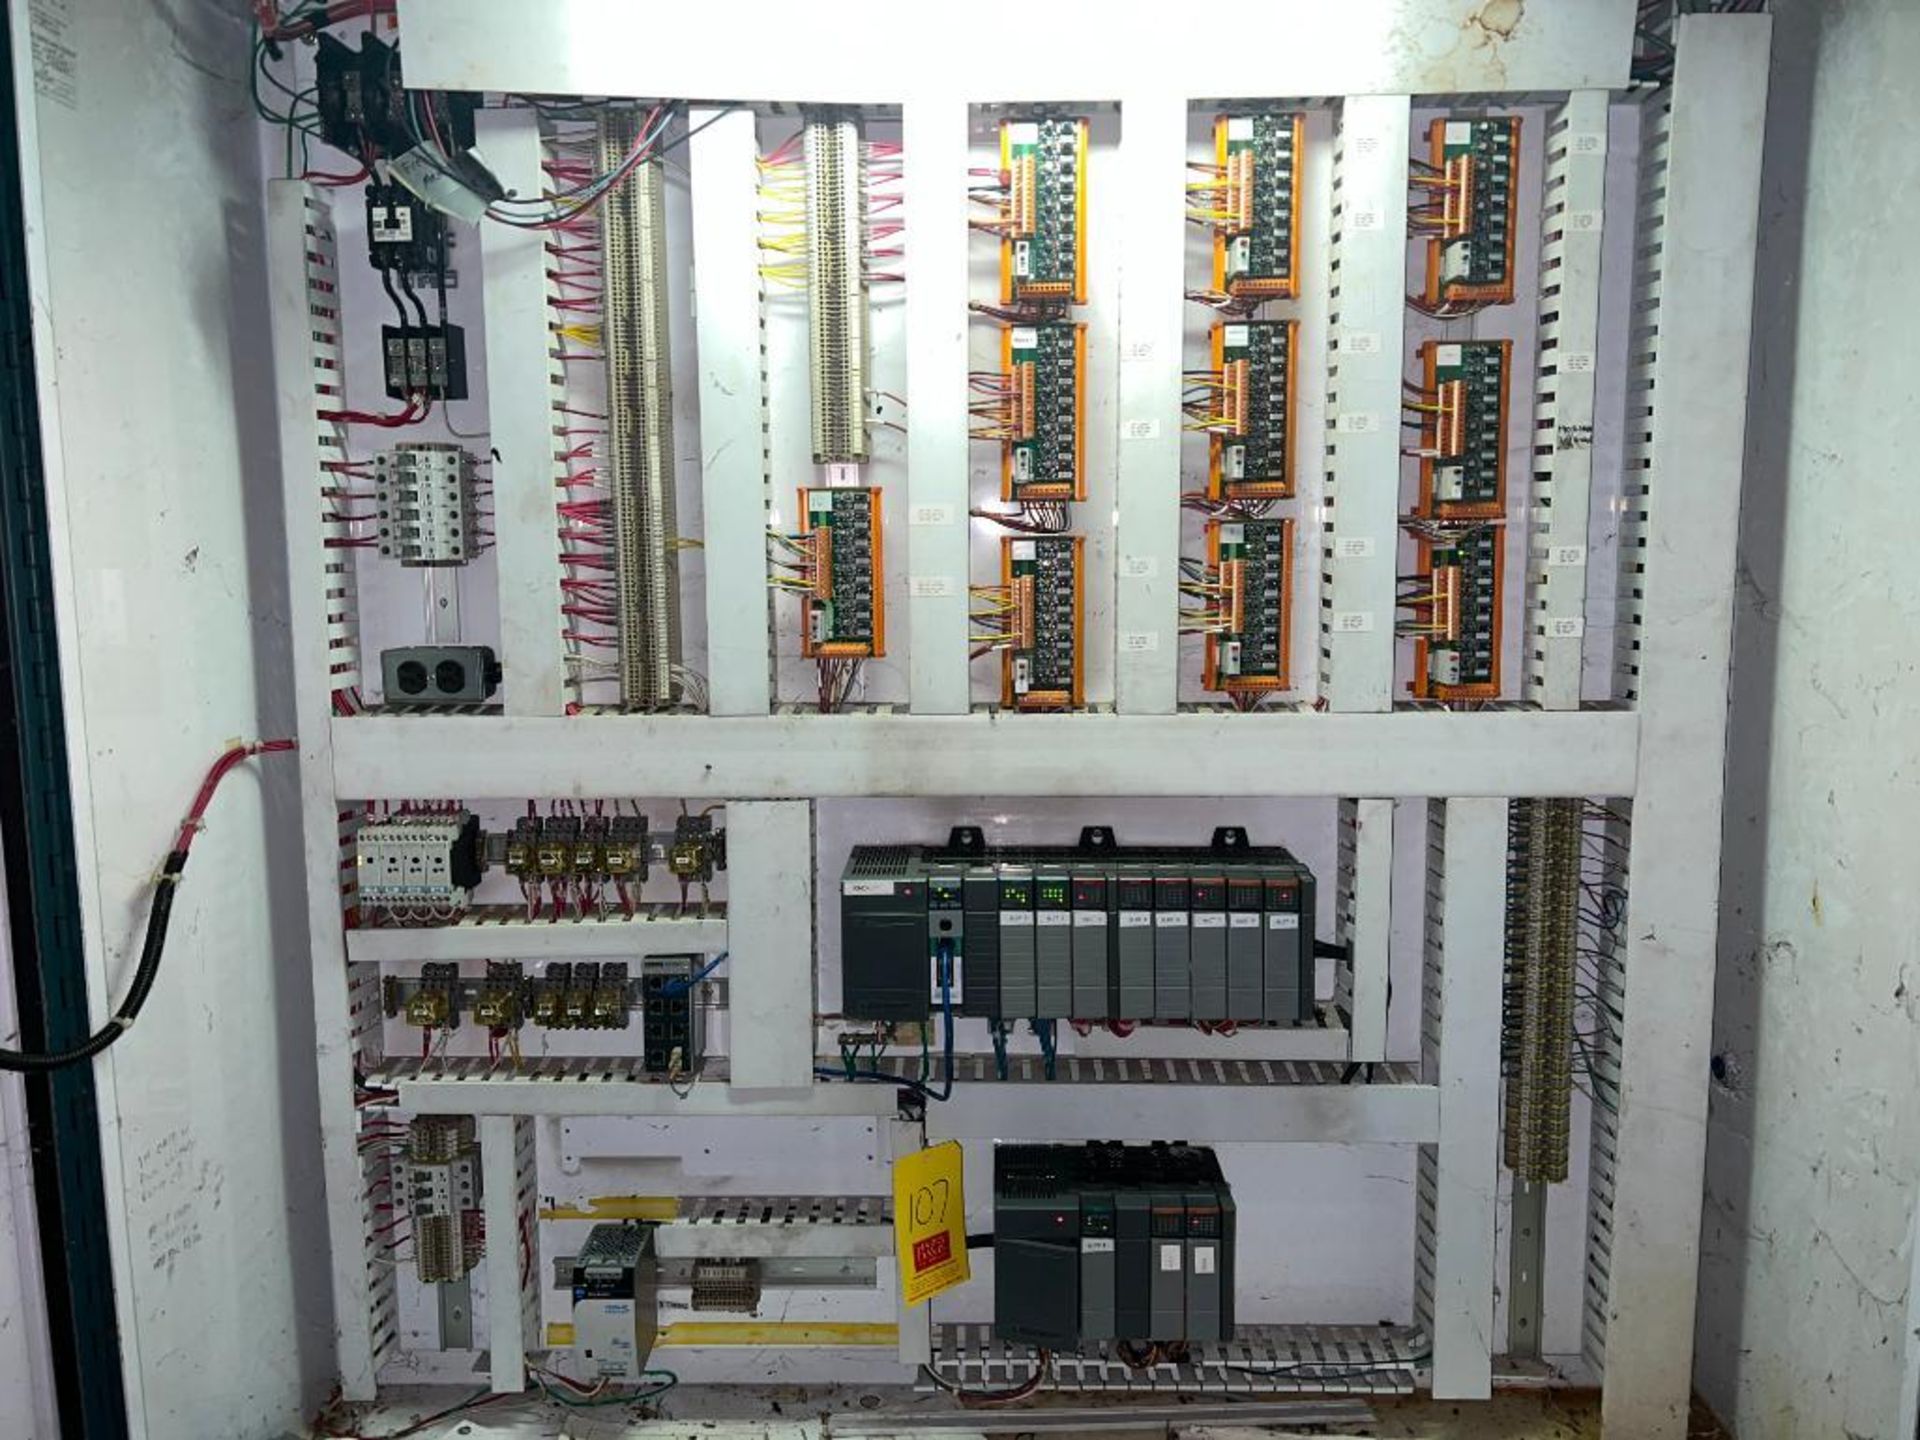 Allen-Bradley SLC 5105 CPU with (11) I/O Cards Modules, Breakers, Allen-Bradley Power Supply and Enc - Image 3 of 3